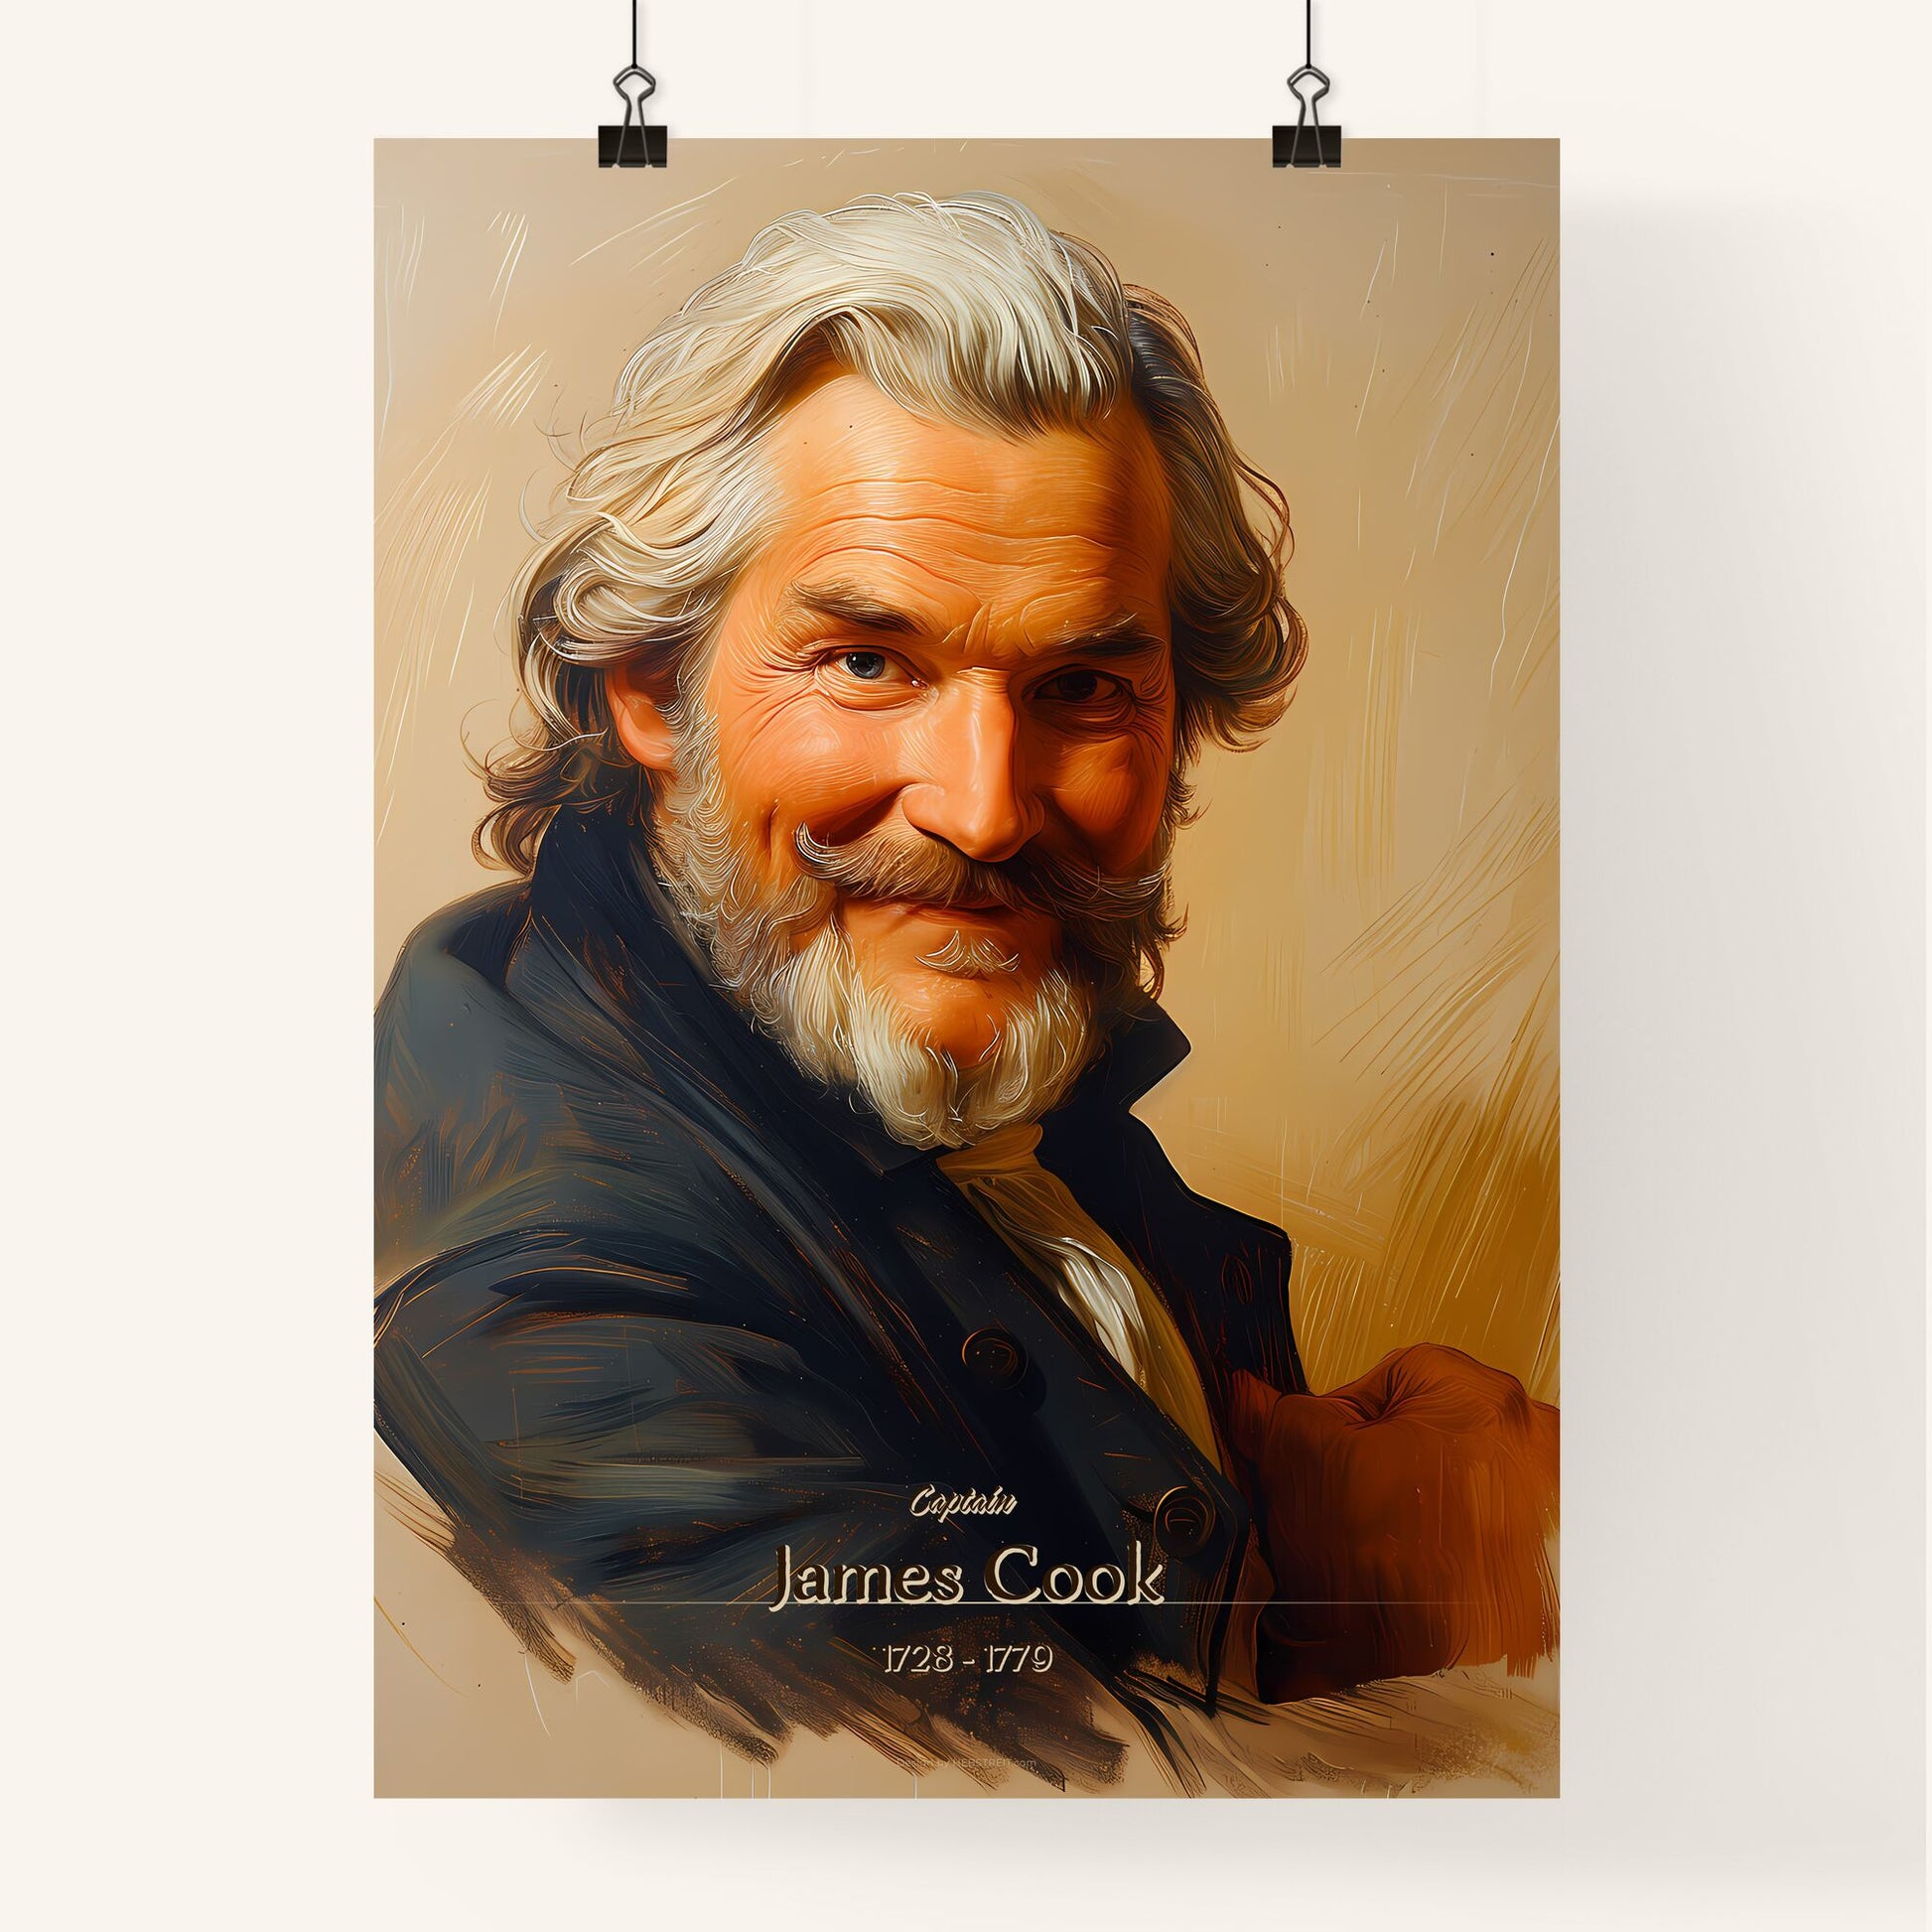 Captain, James Cook, 1728 - 1779, A Poster of a man with a beard and mustache Default Title